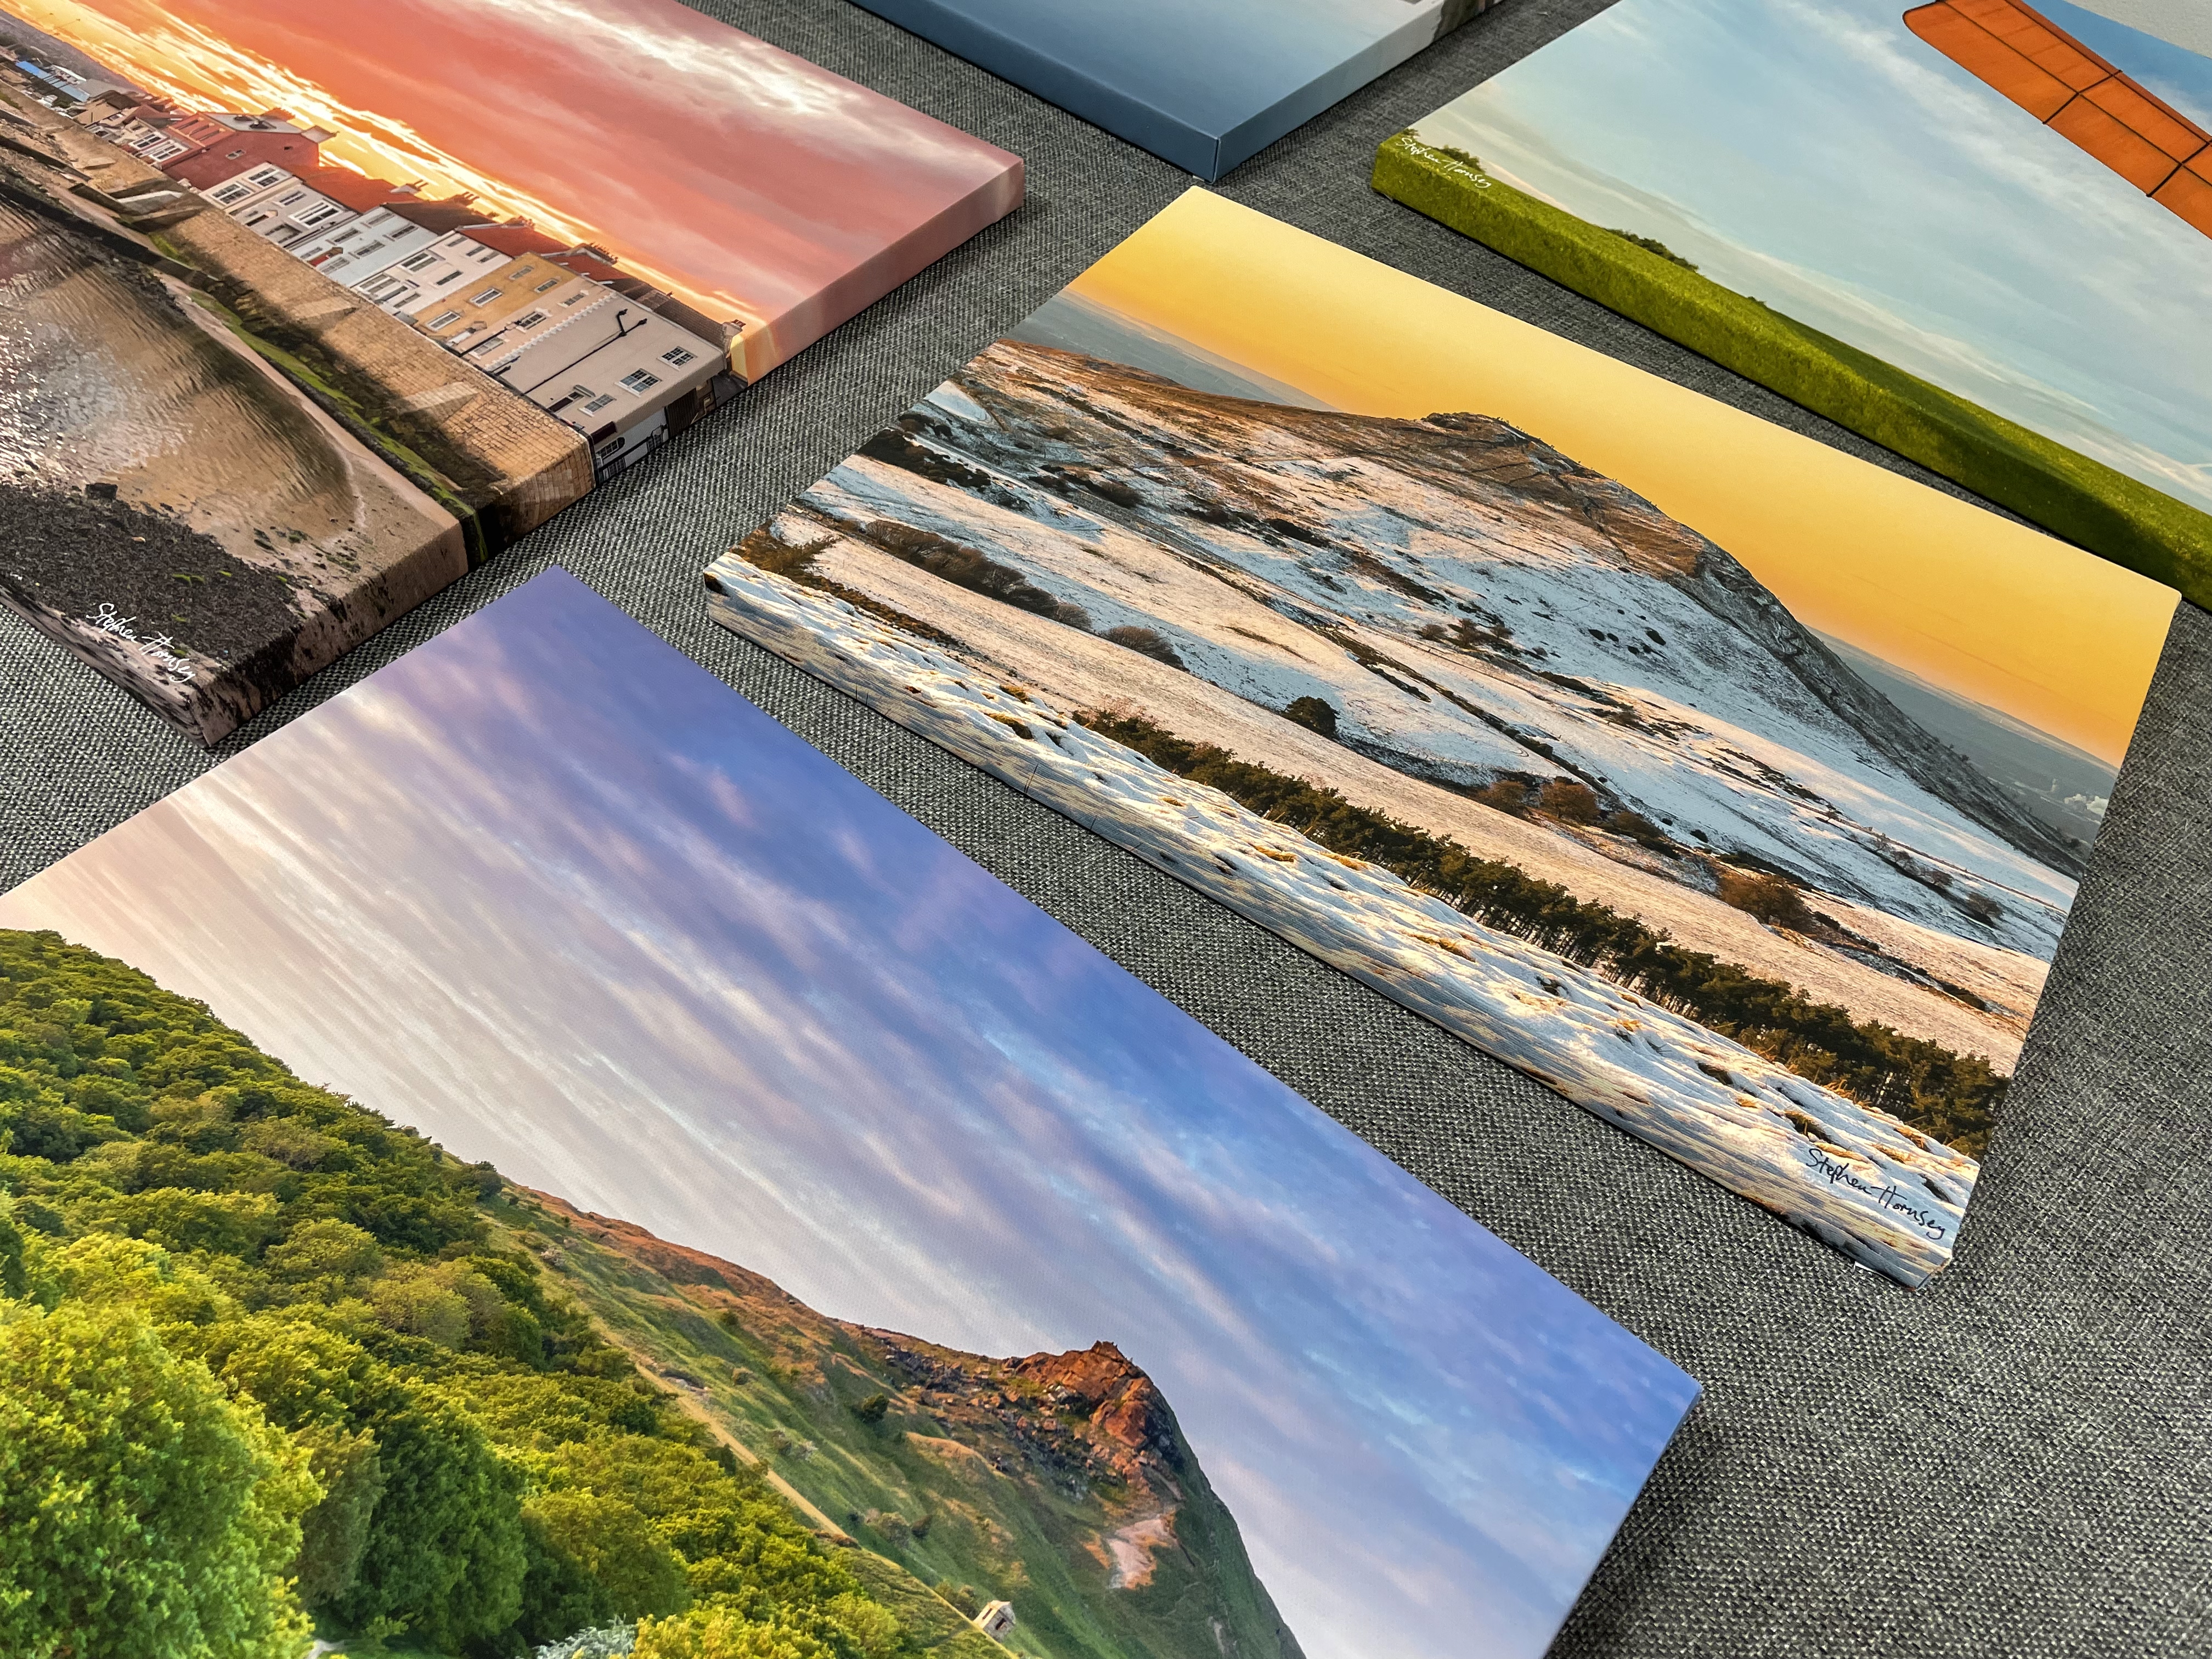 Transform your travel memories by displaying your brilliant photos of places you have visited and printing them onto canvas.